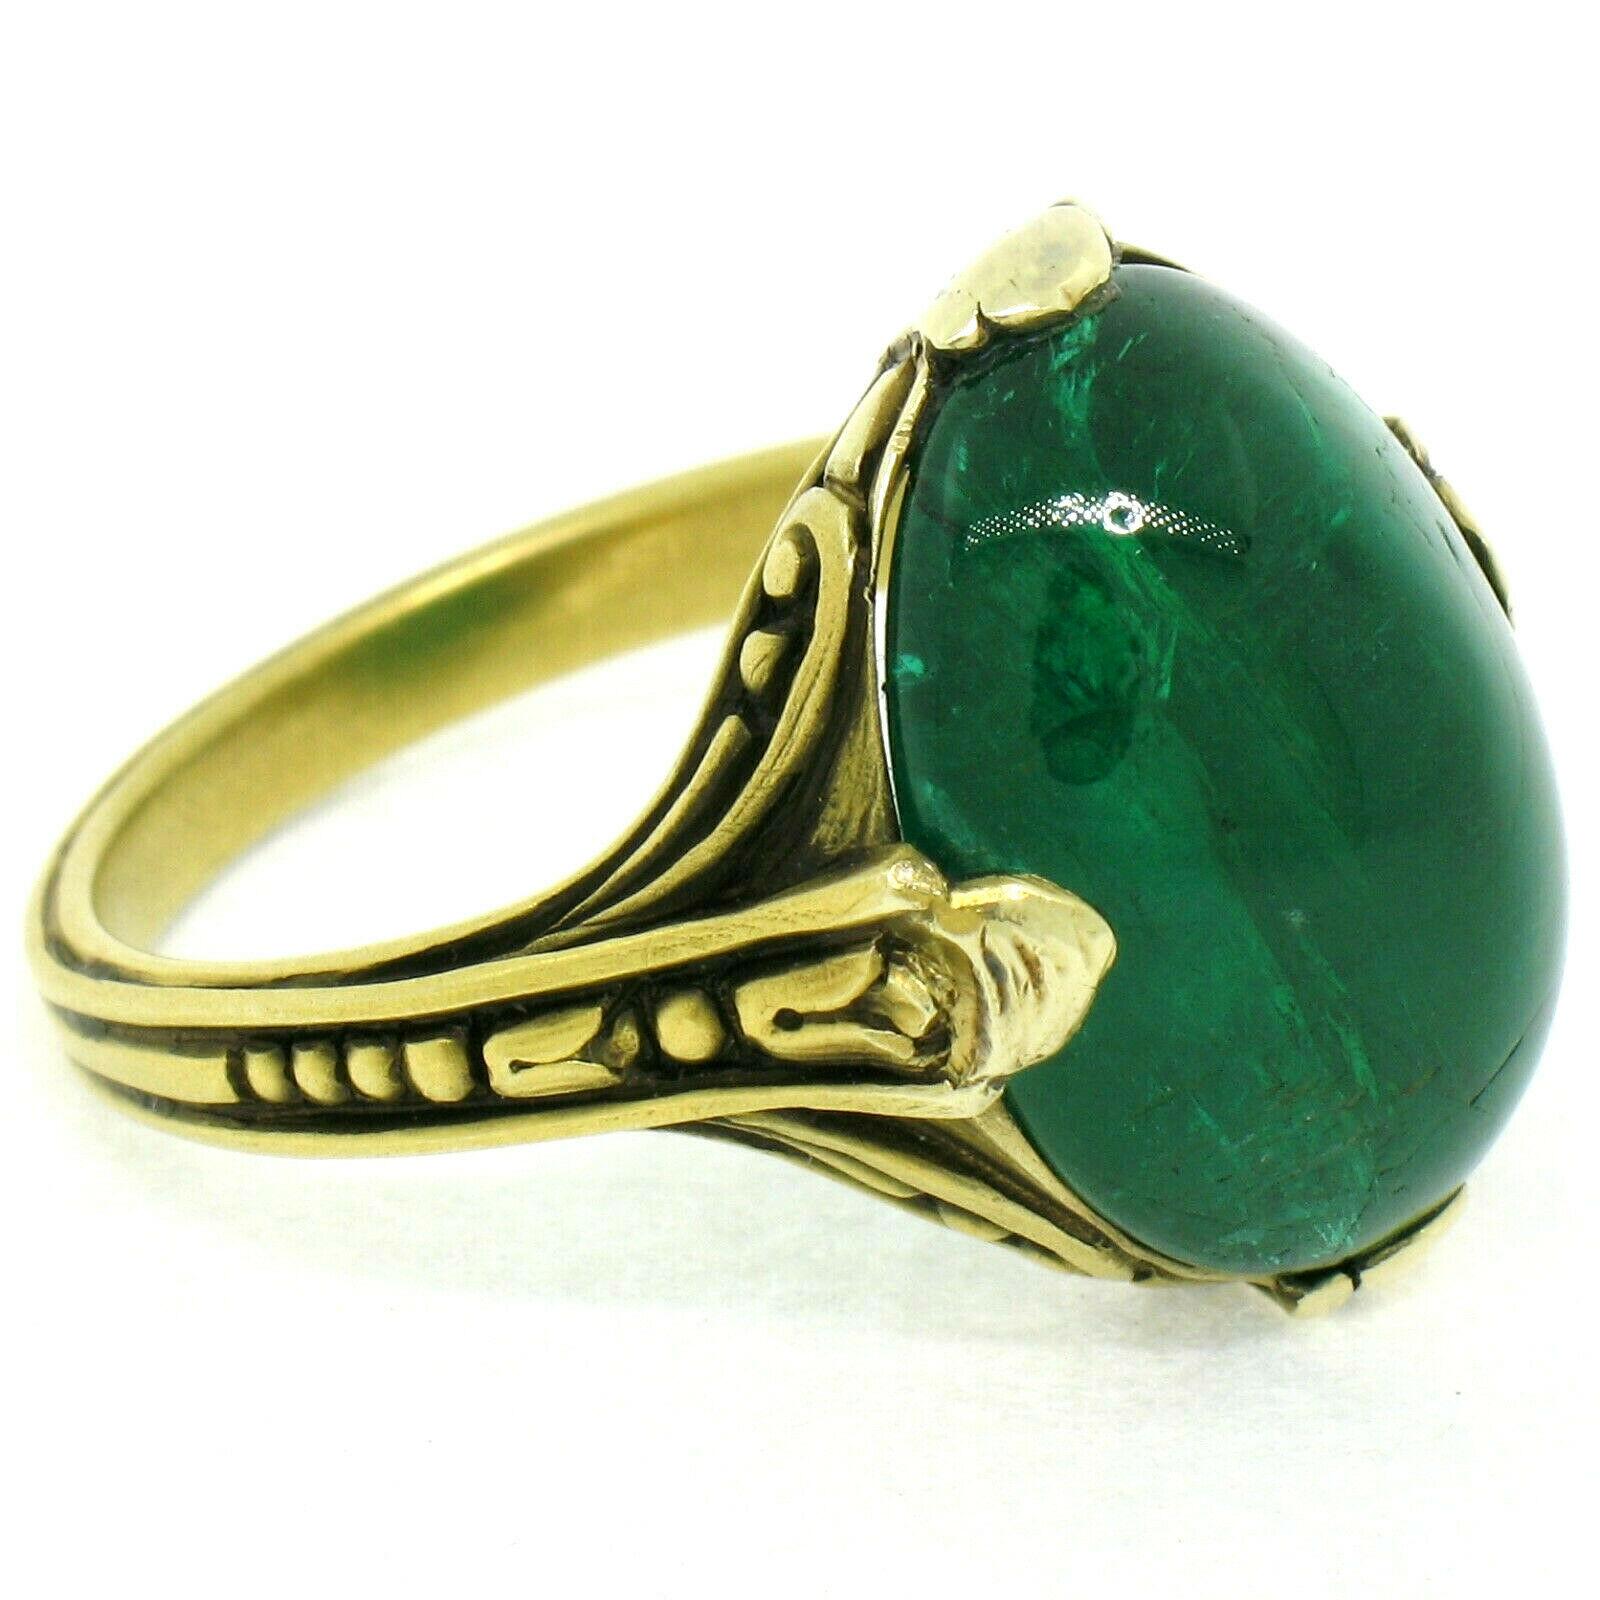 Antique 14k Gold 10.03ct GIA Oval Cabochon Very Fine Green Zambian Emerald Ring 1